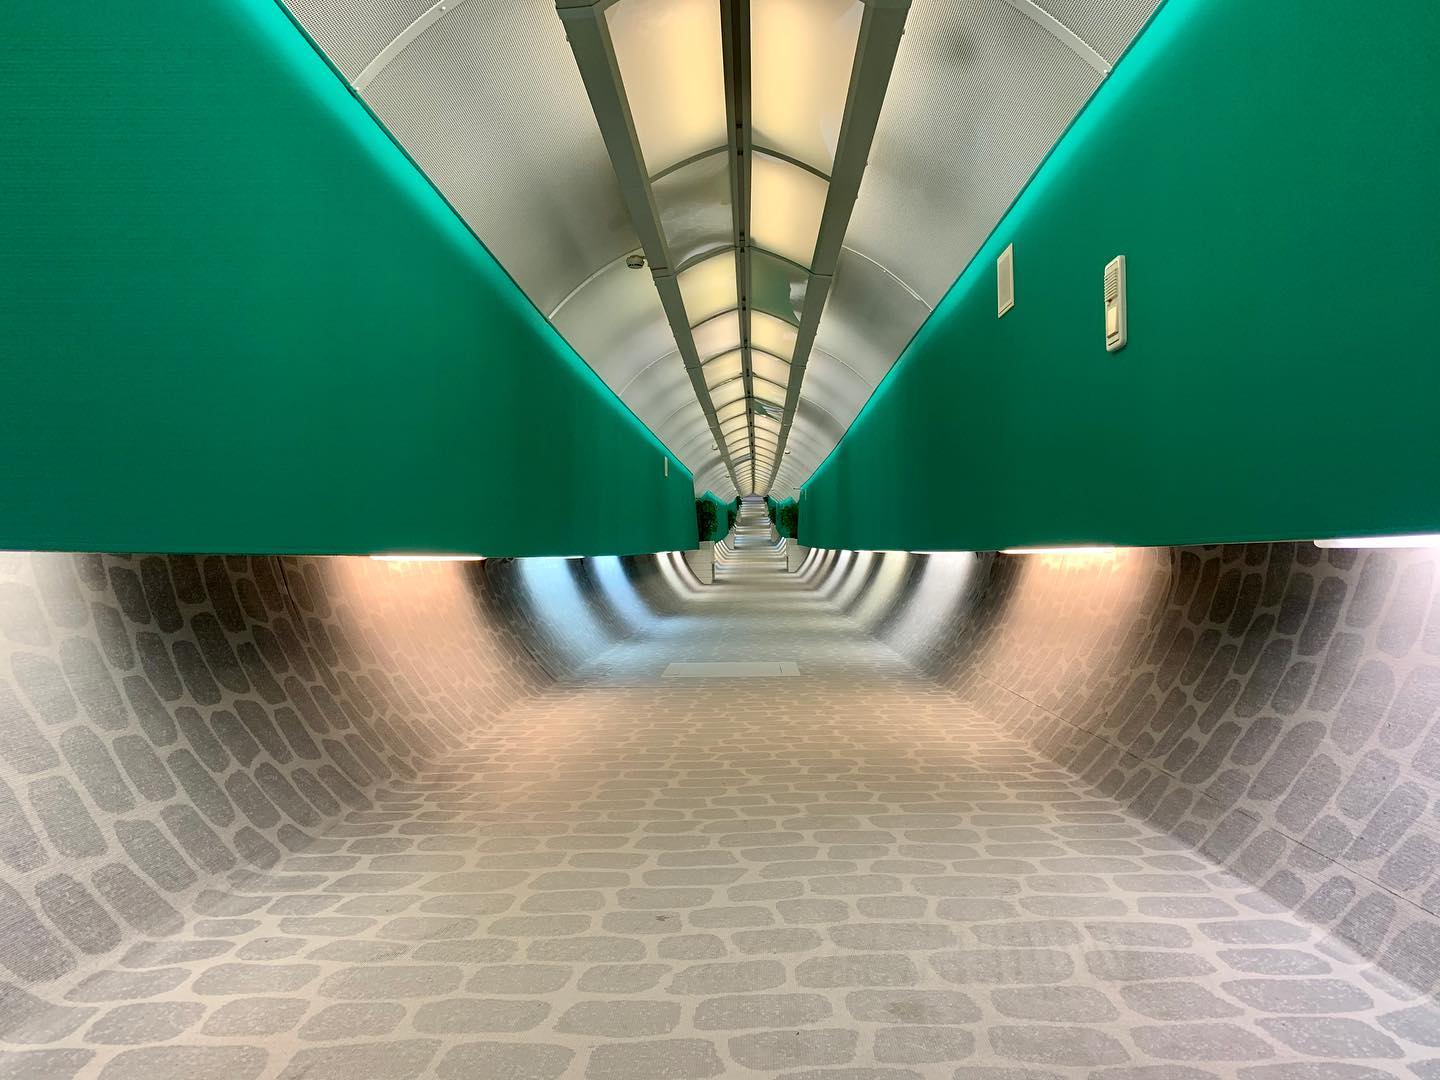 Tunnel to the other side